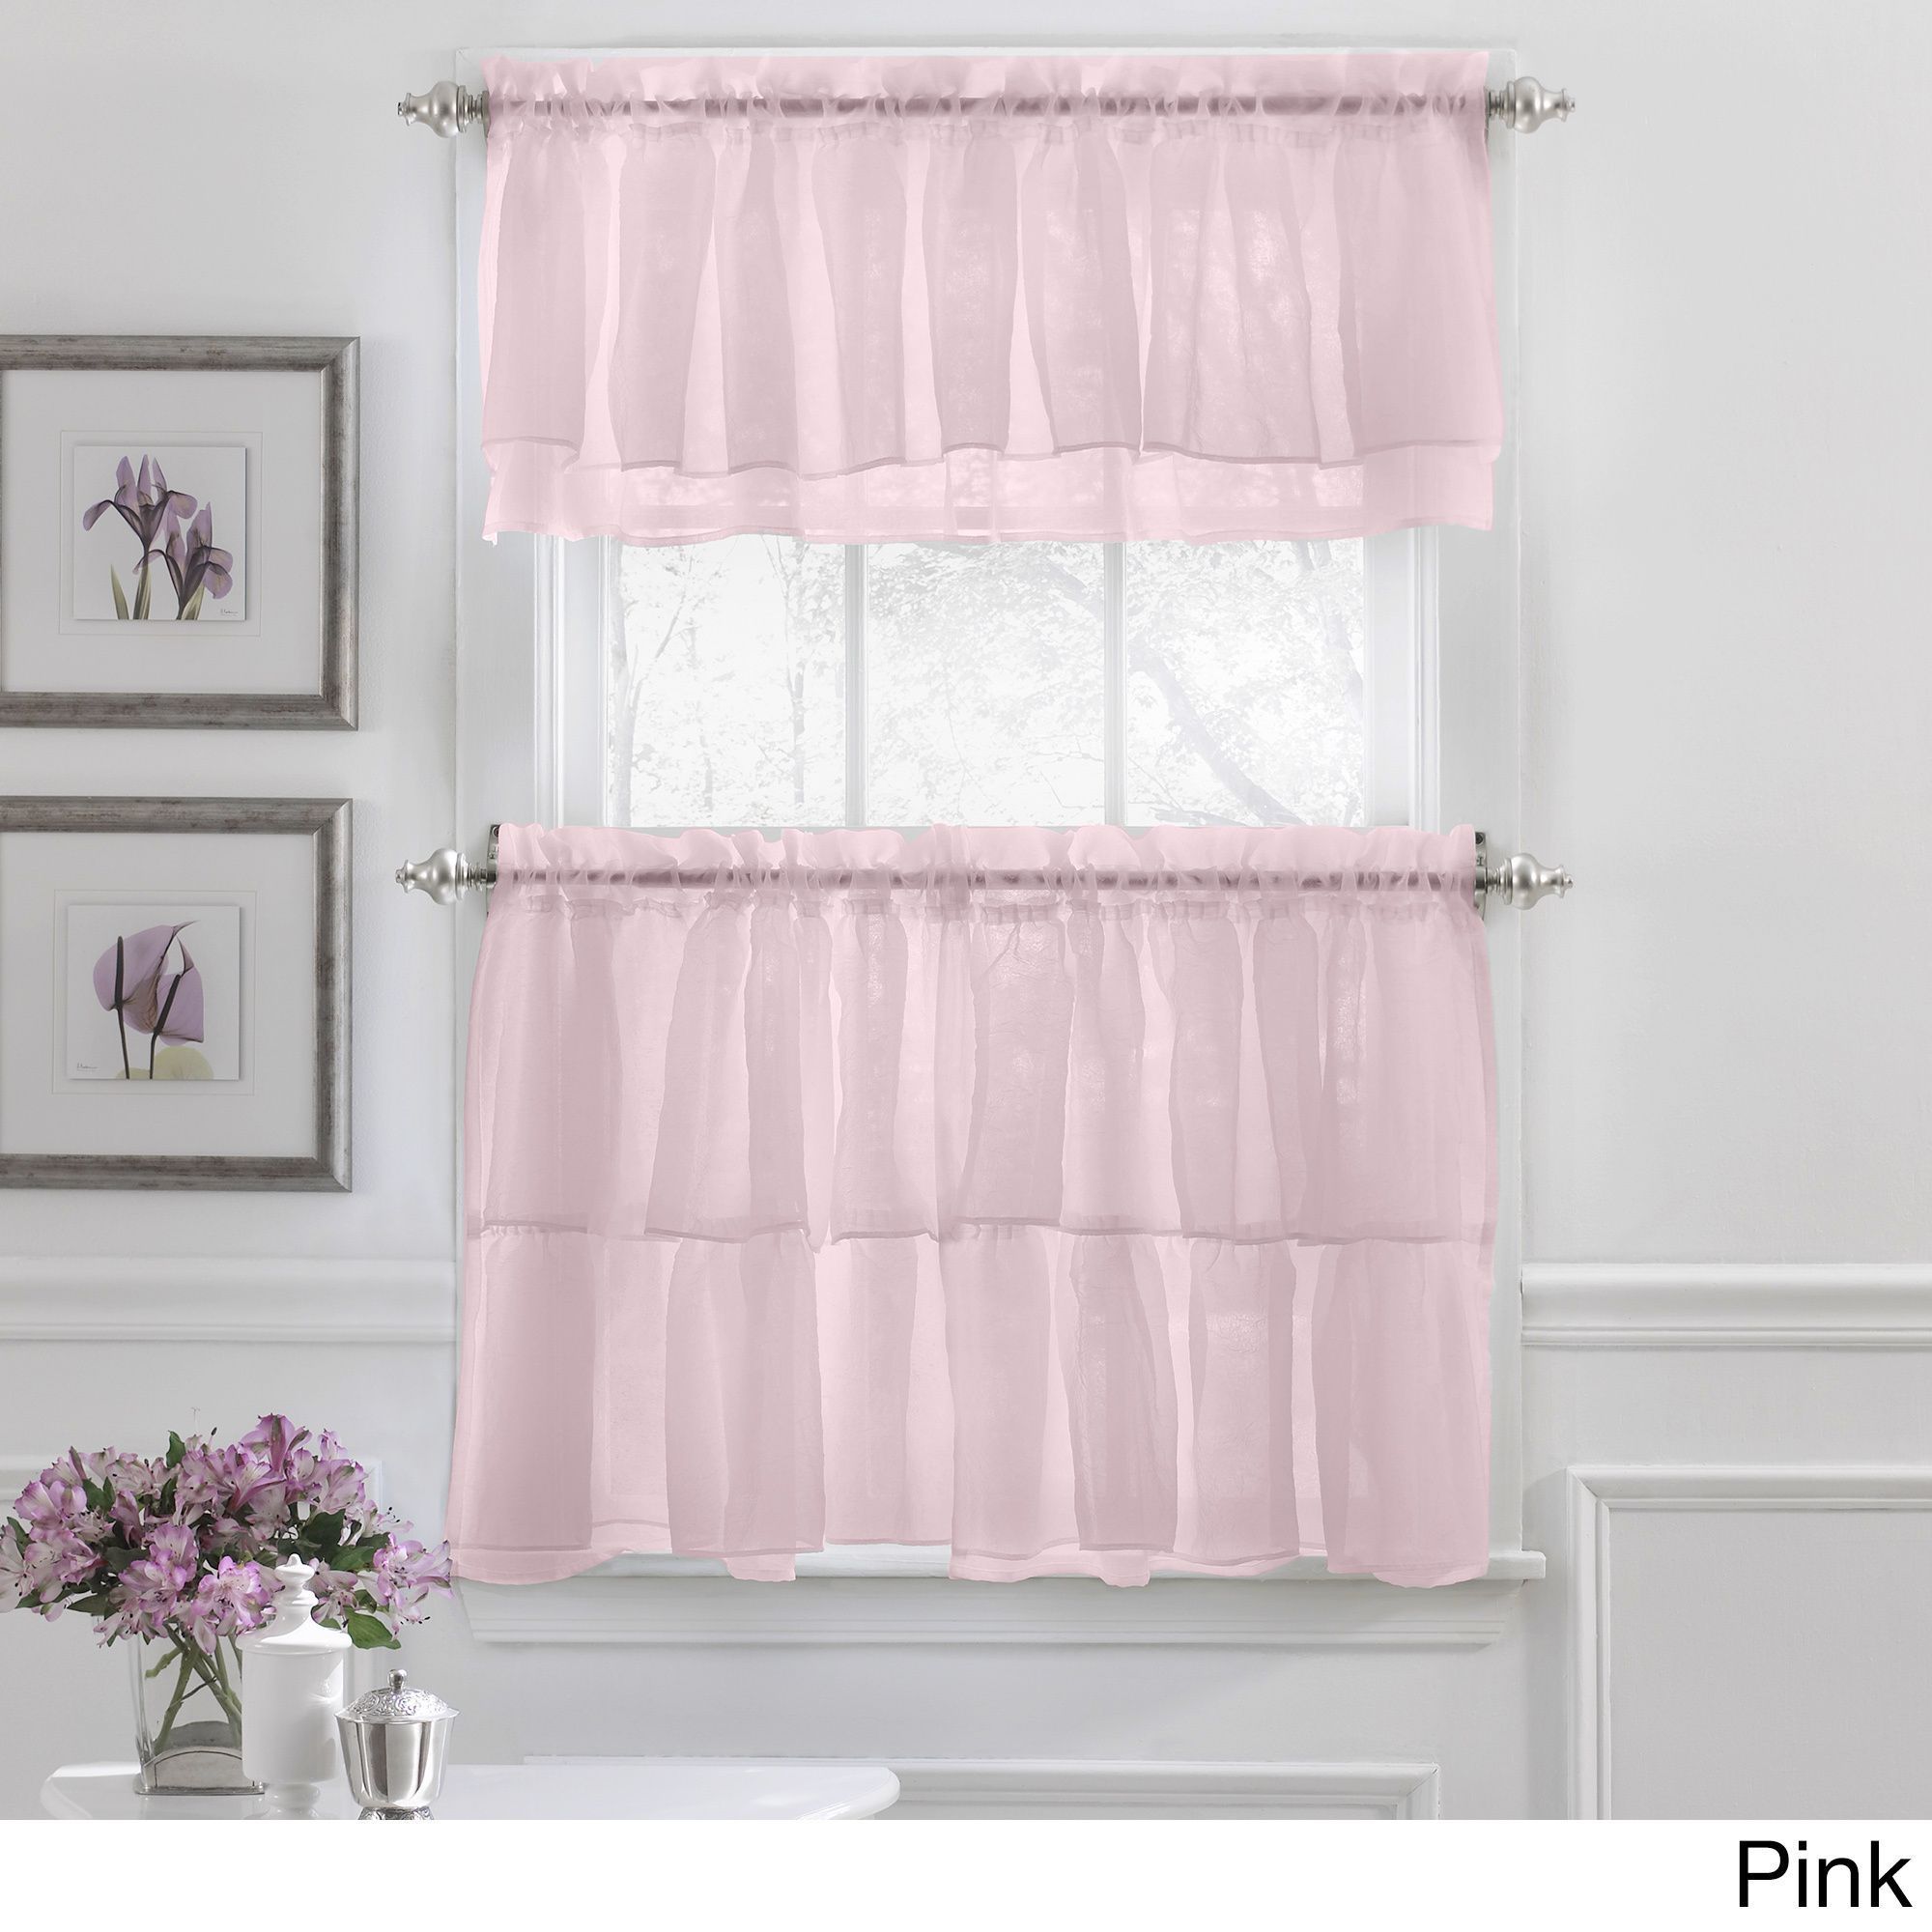 Featured Photo of Top 20 of Elegant Crushed Voile Ruffle Window Curtain Pieces